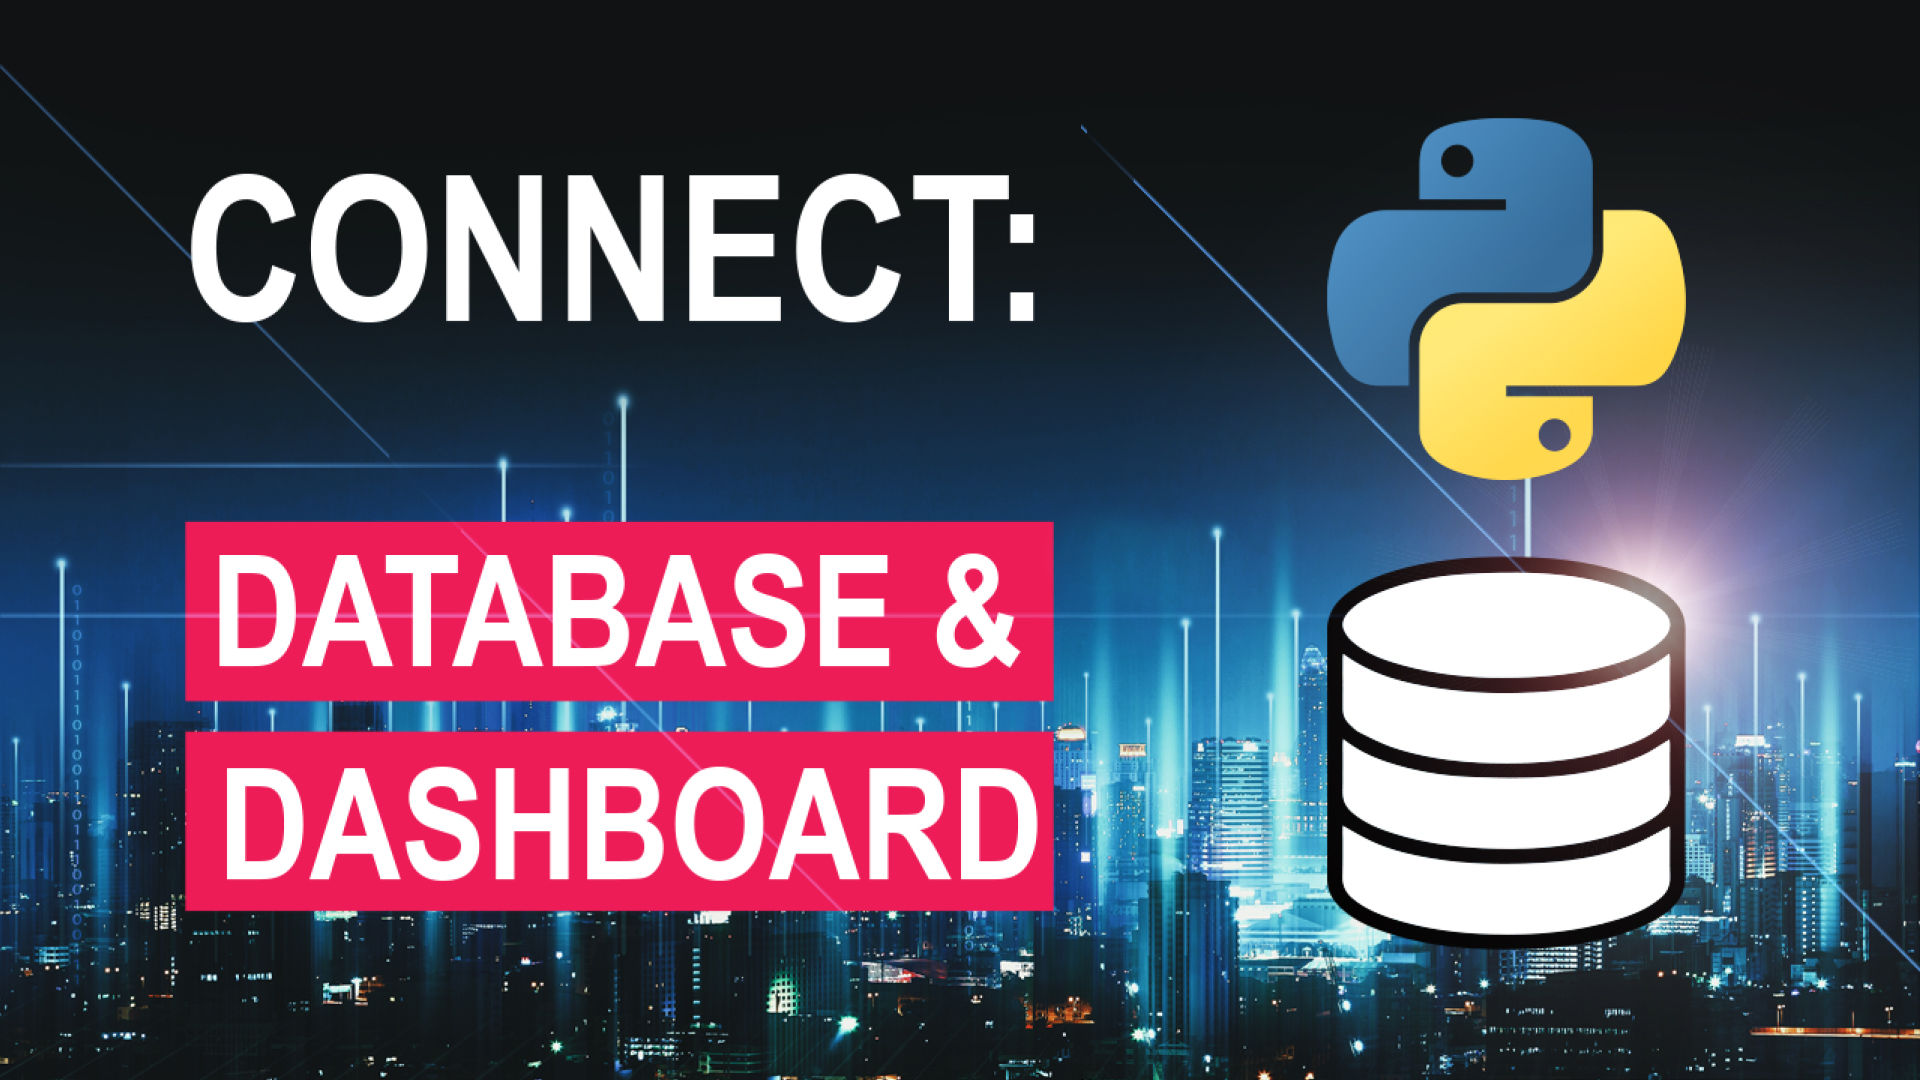 A connect: database & dashboard image with a yellow snake logo.